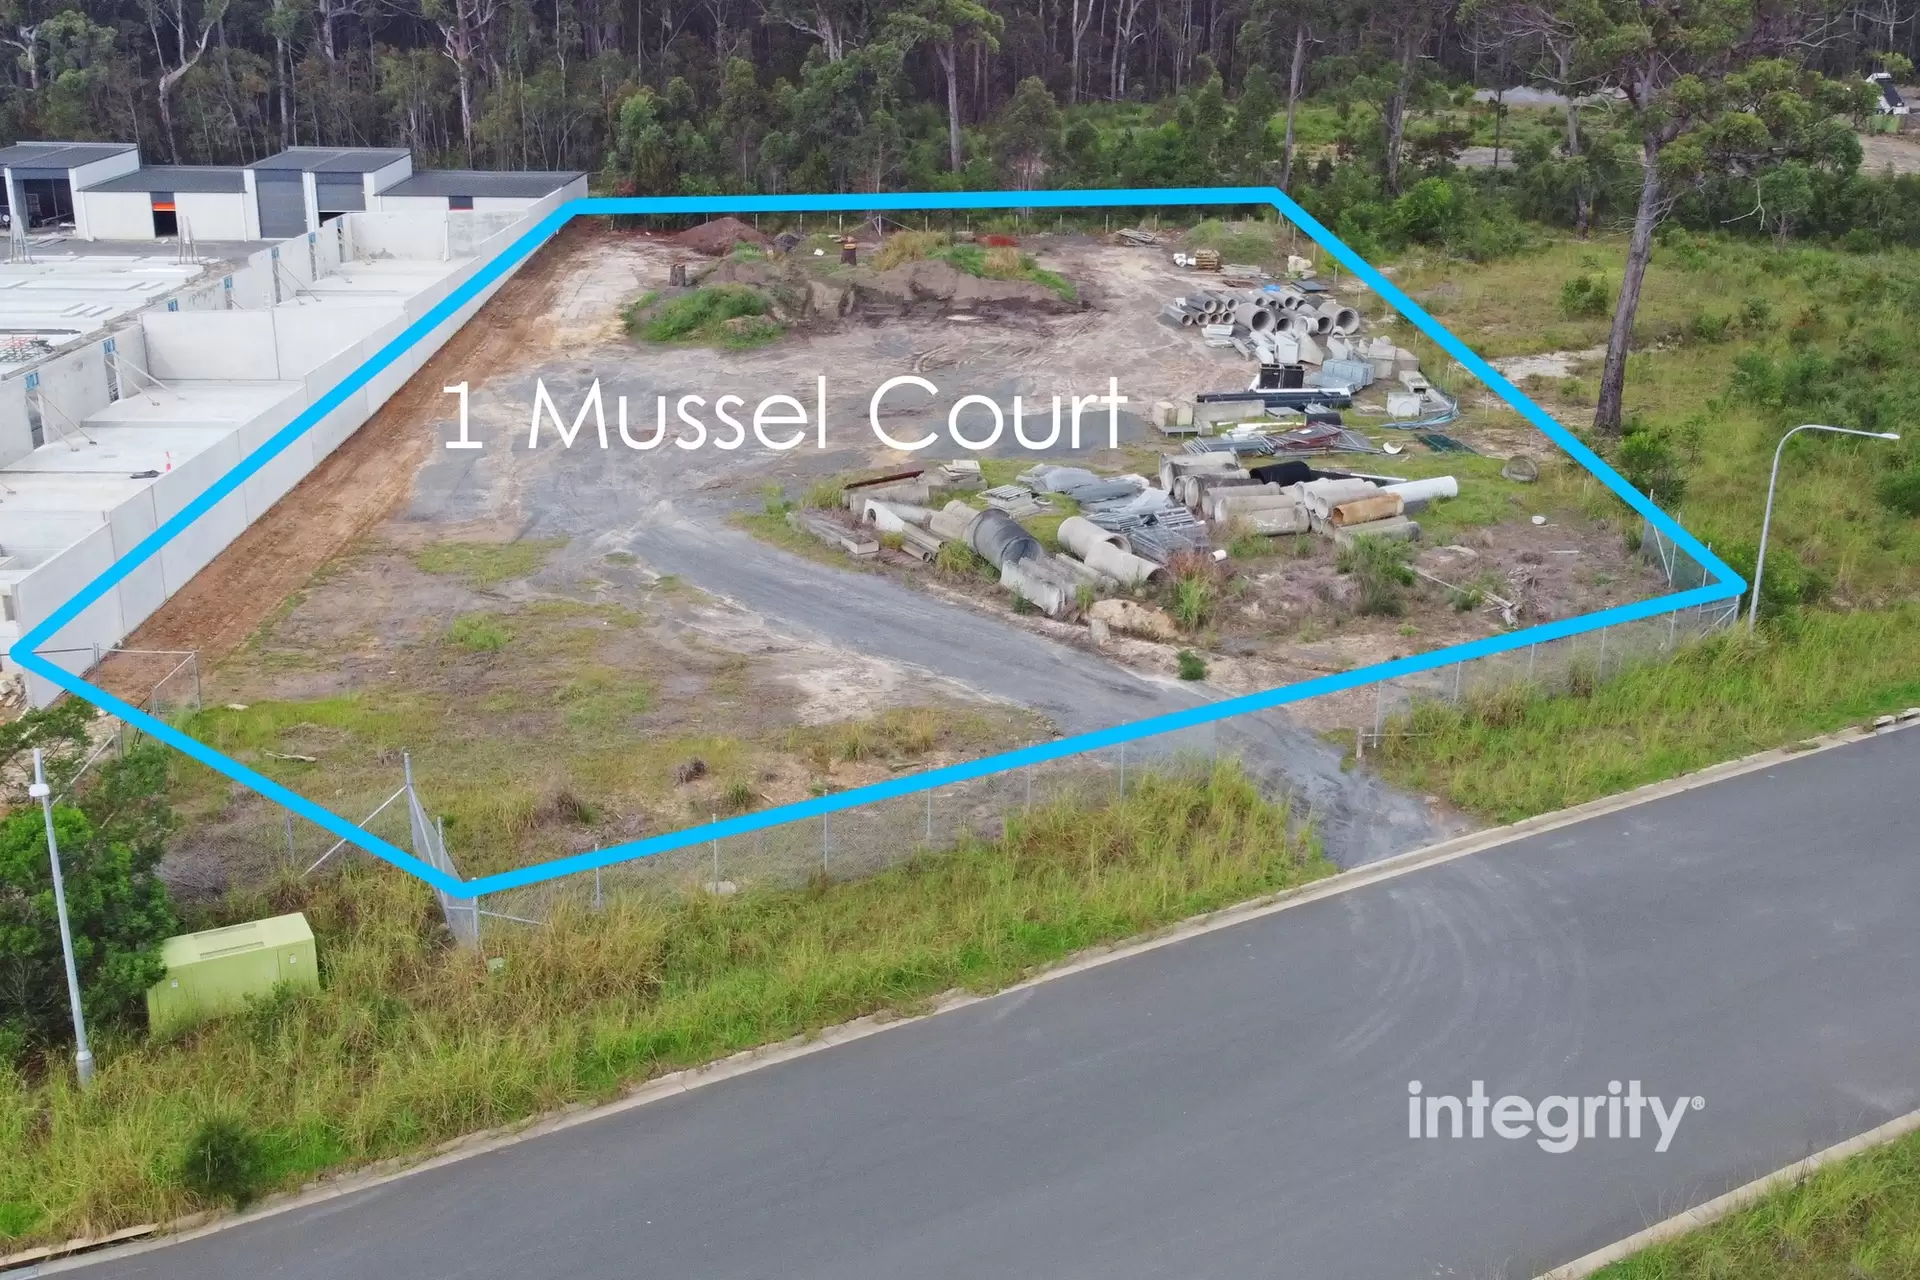 1 Mussel Court, Huskisson Auction by Integrity Real Estate